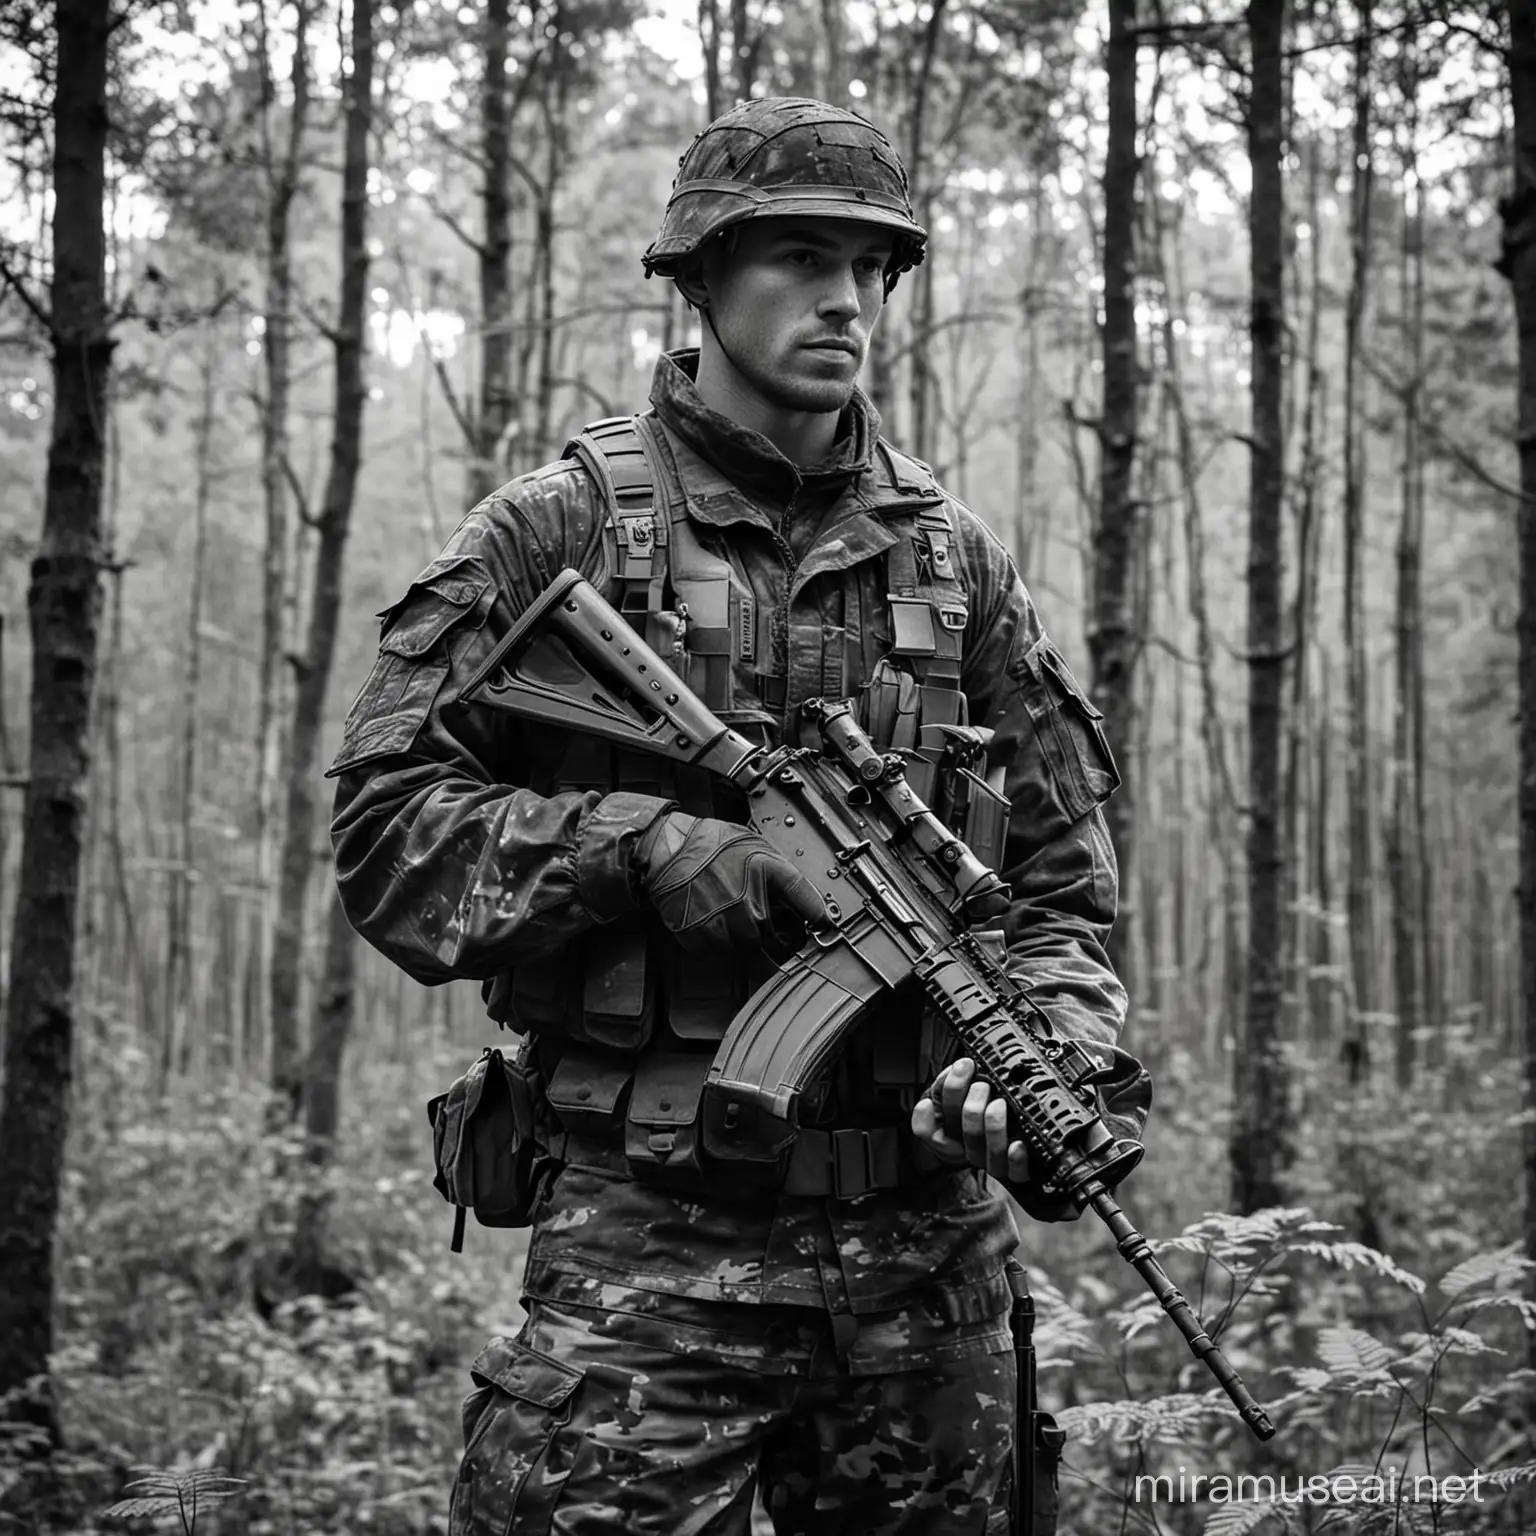 CamoClad Soldier in Forest Setting